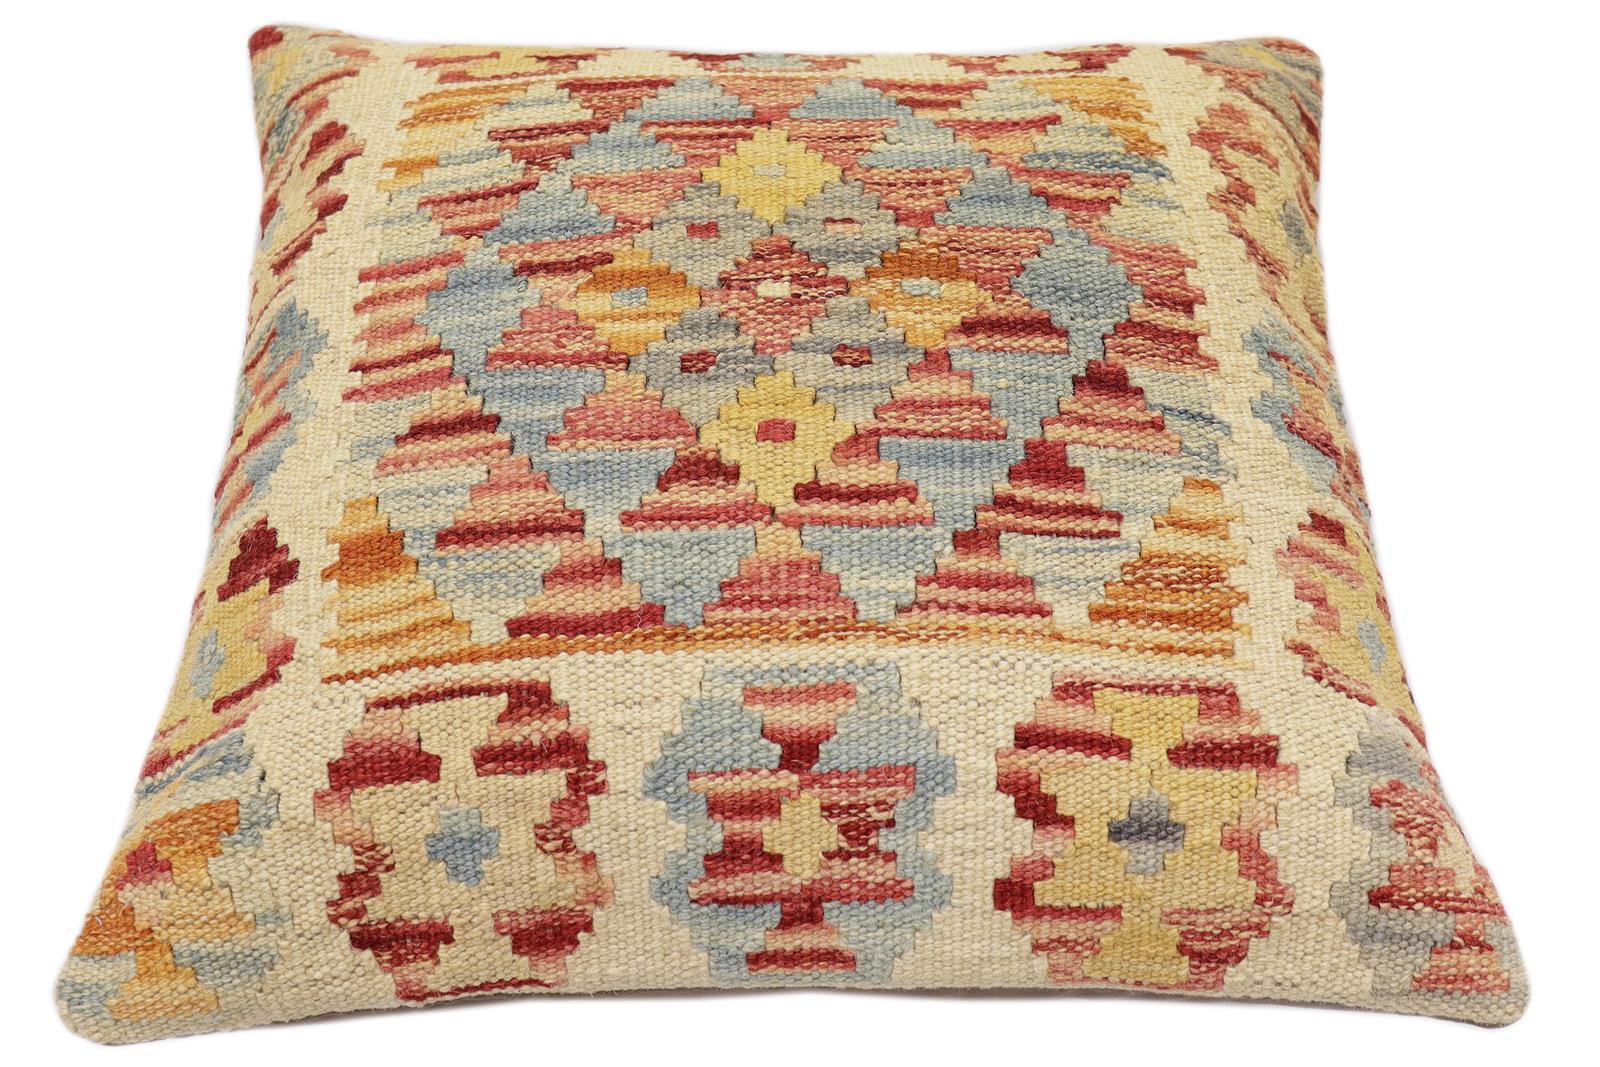 handmade Traditional Pillow Rust Red Hand-made SQUARE 100% WOOL Hand woven turkish pillow2' x 2'